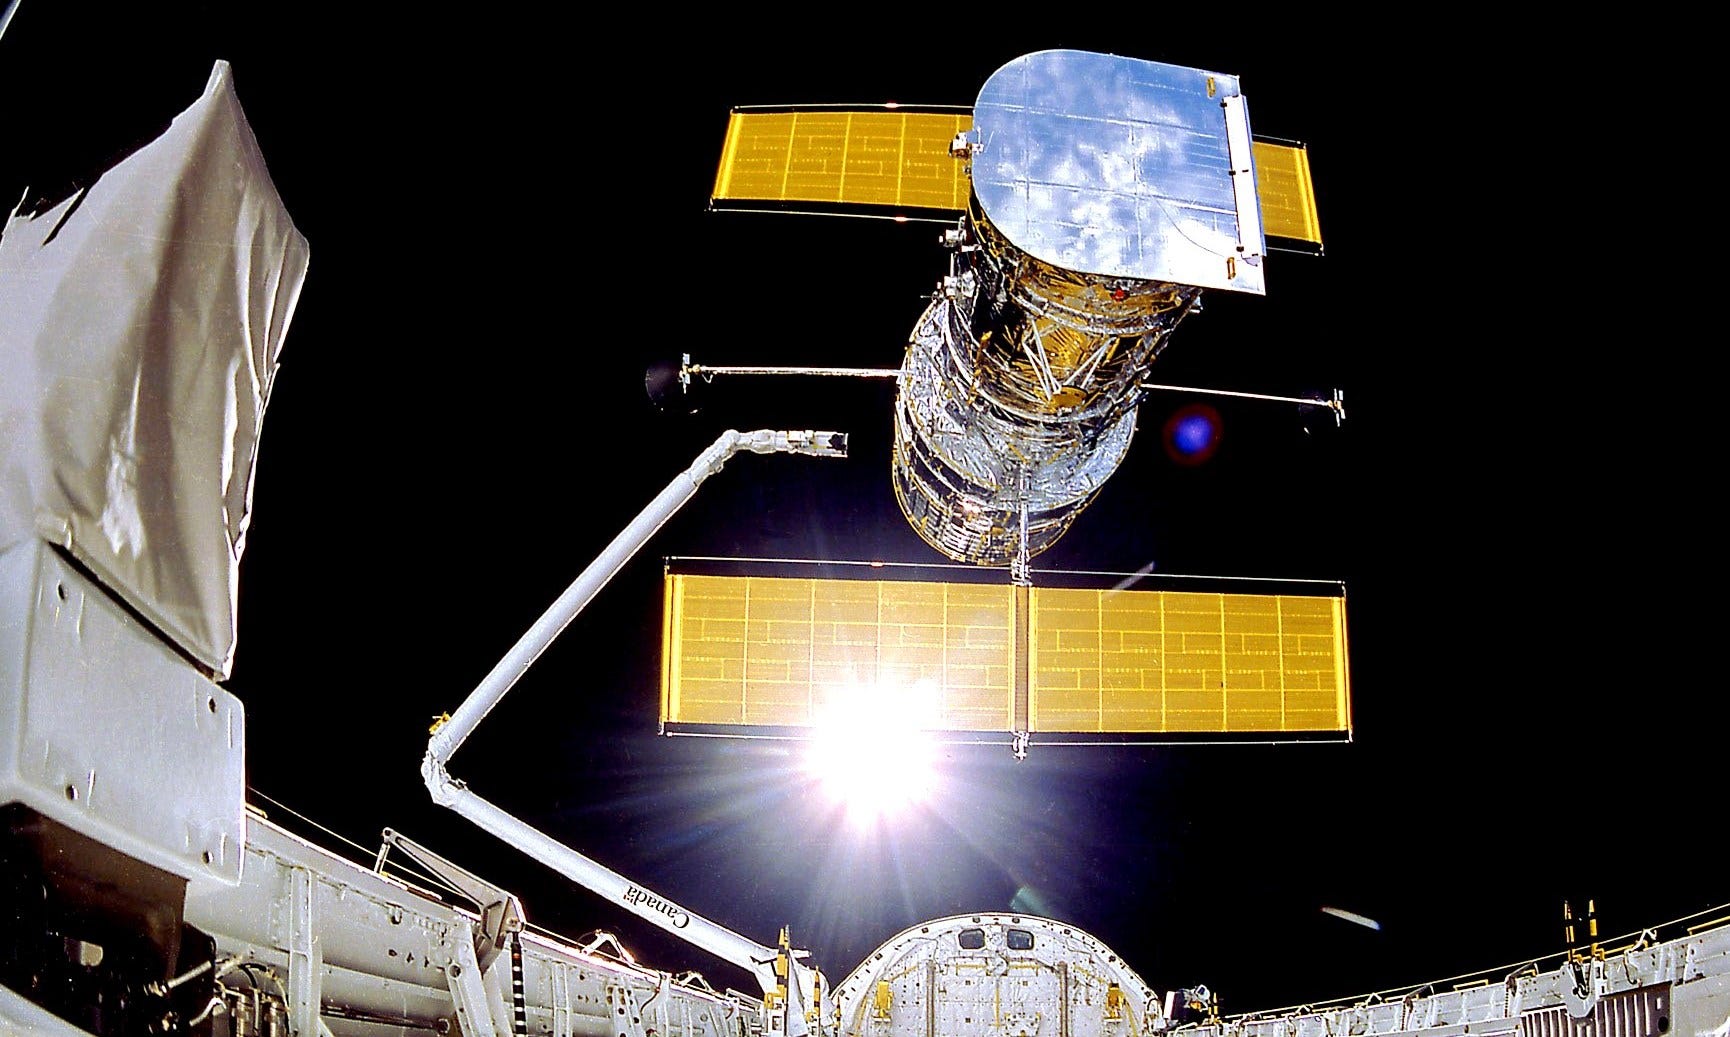 hubble space telesope deploys from space shuttle arm in earth orbit